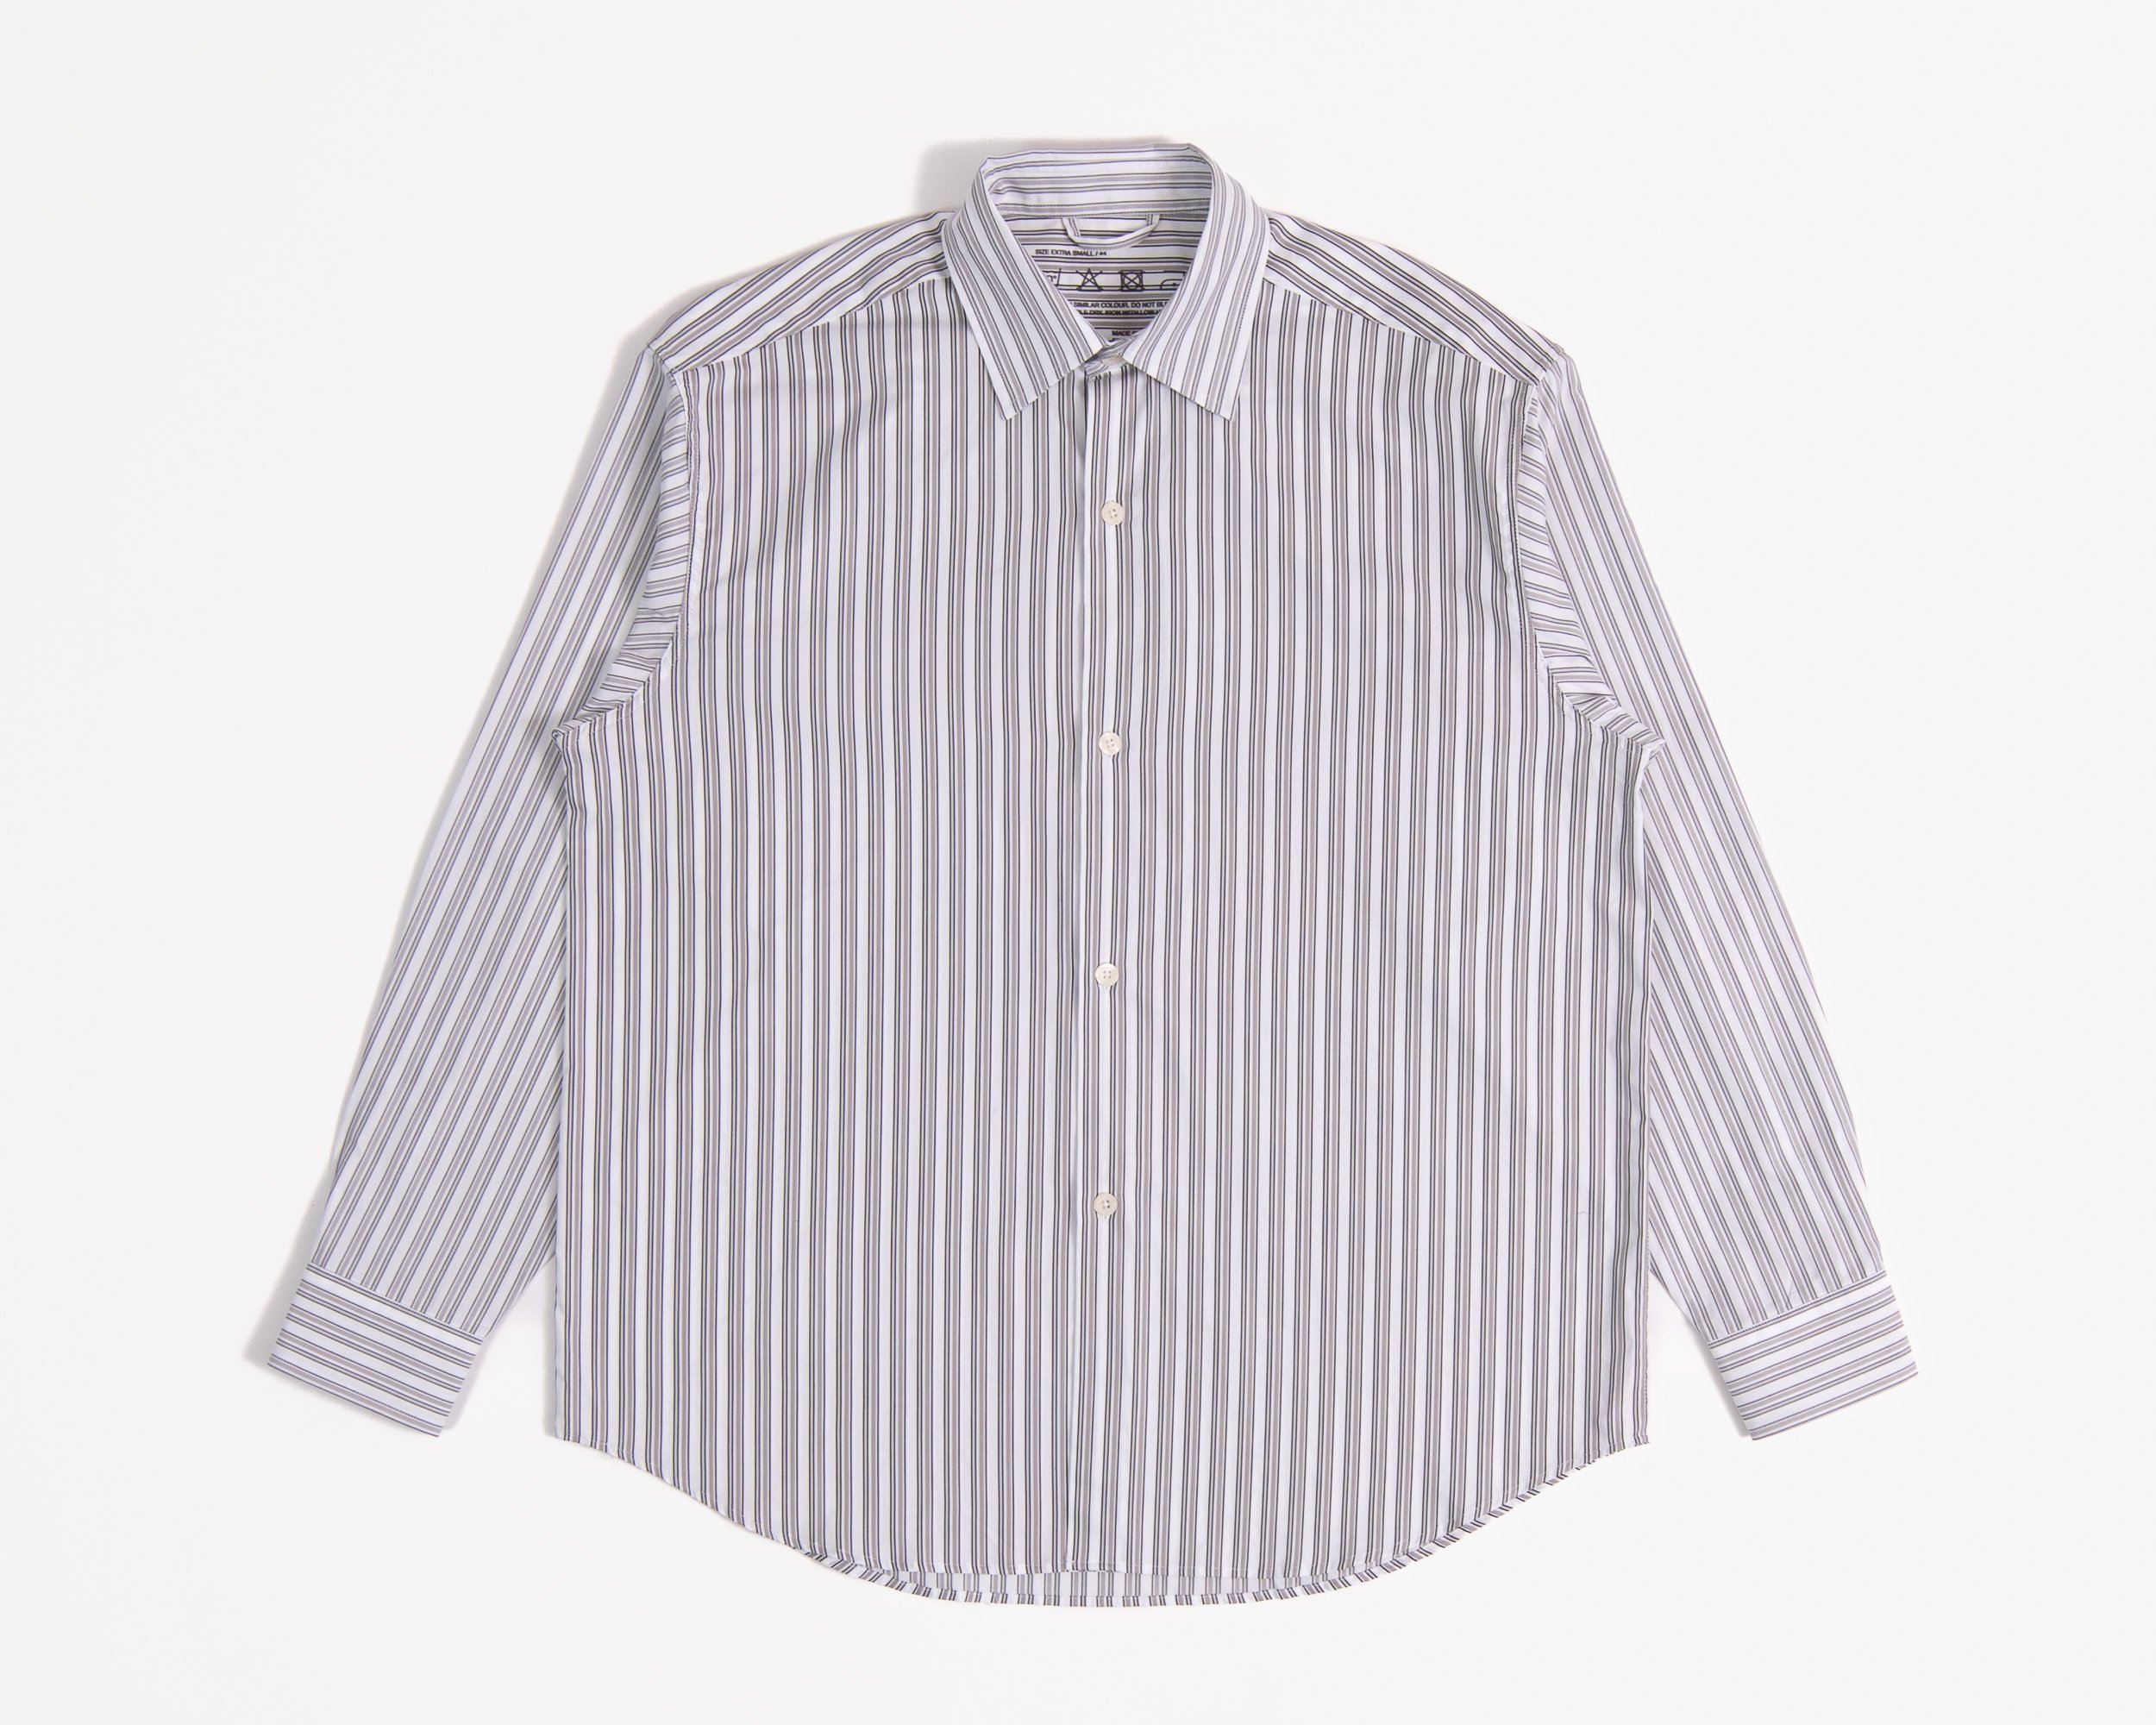 Executive Shirt in Blue Stripe — East • West